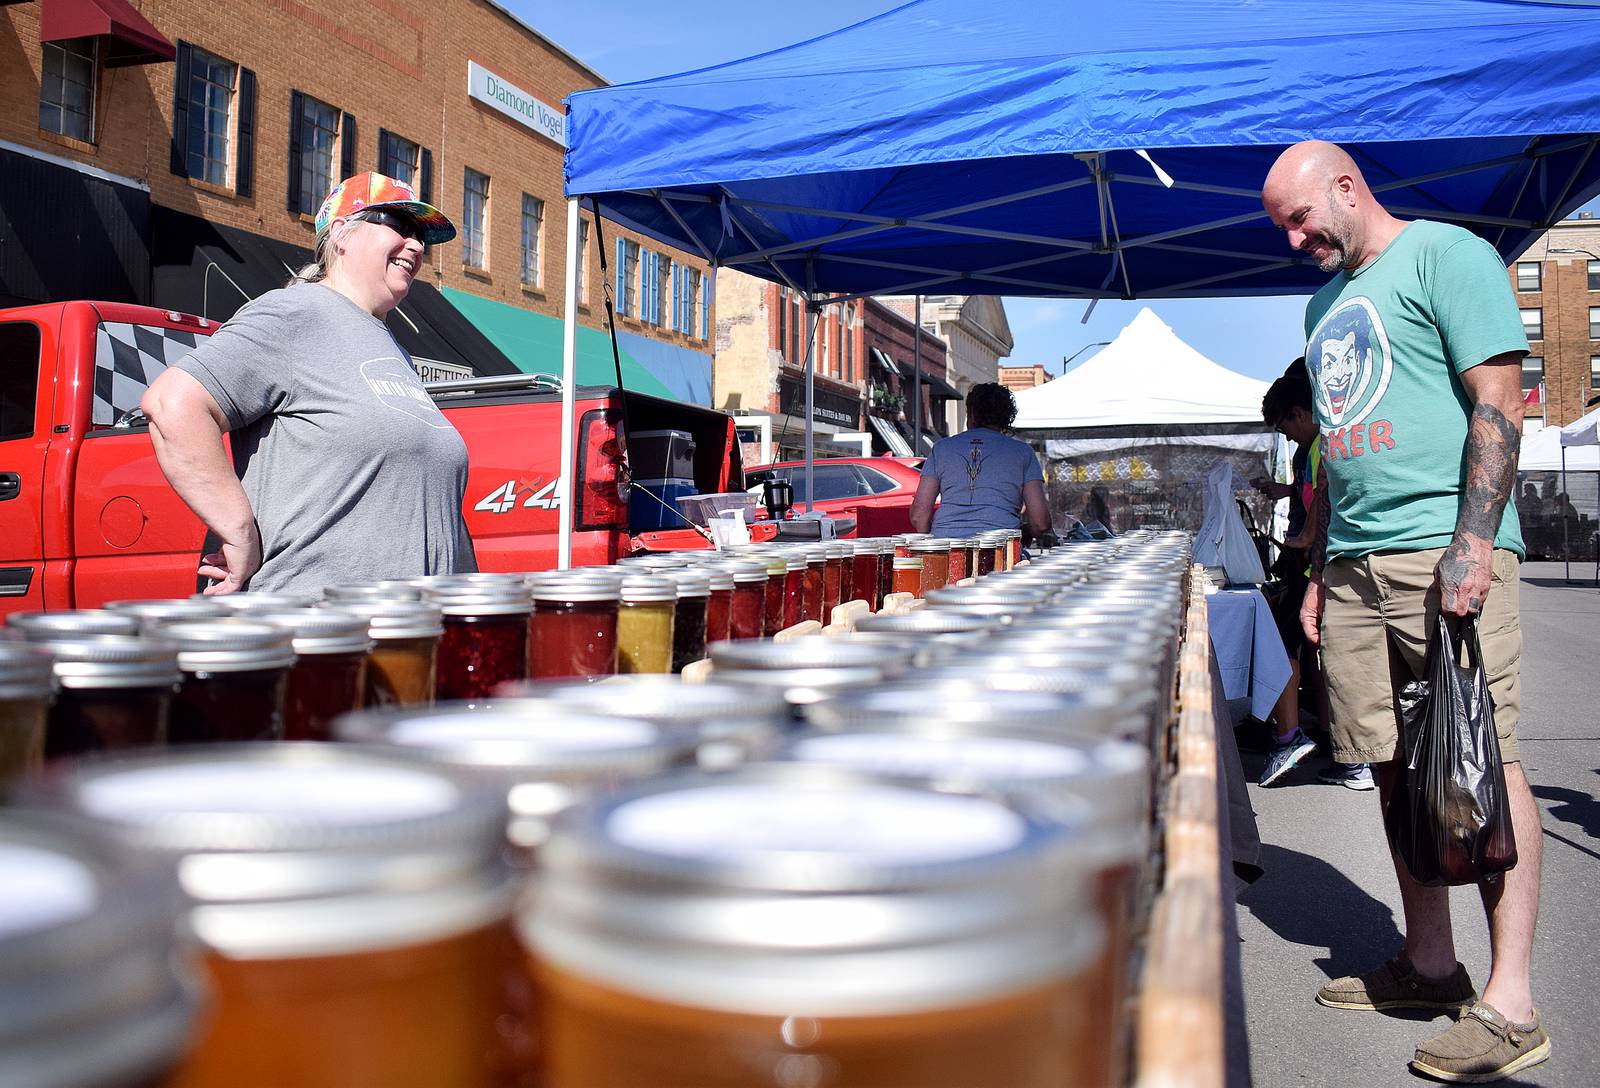 MARKET RETURNS Vendors return downtown for the first day of Newton